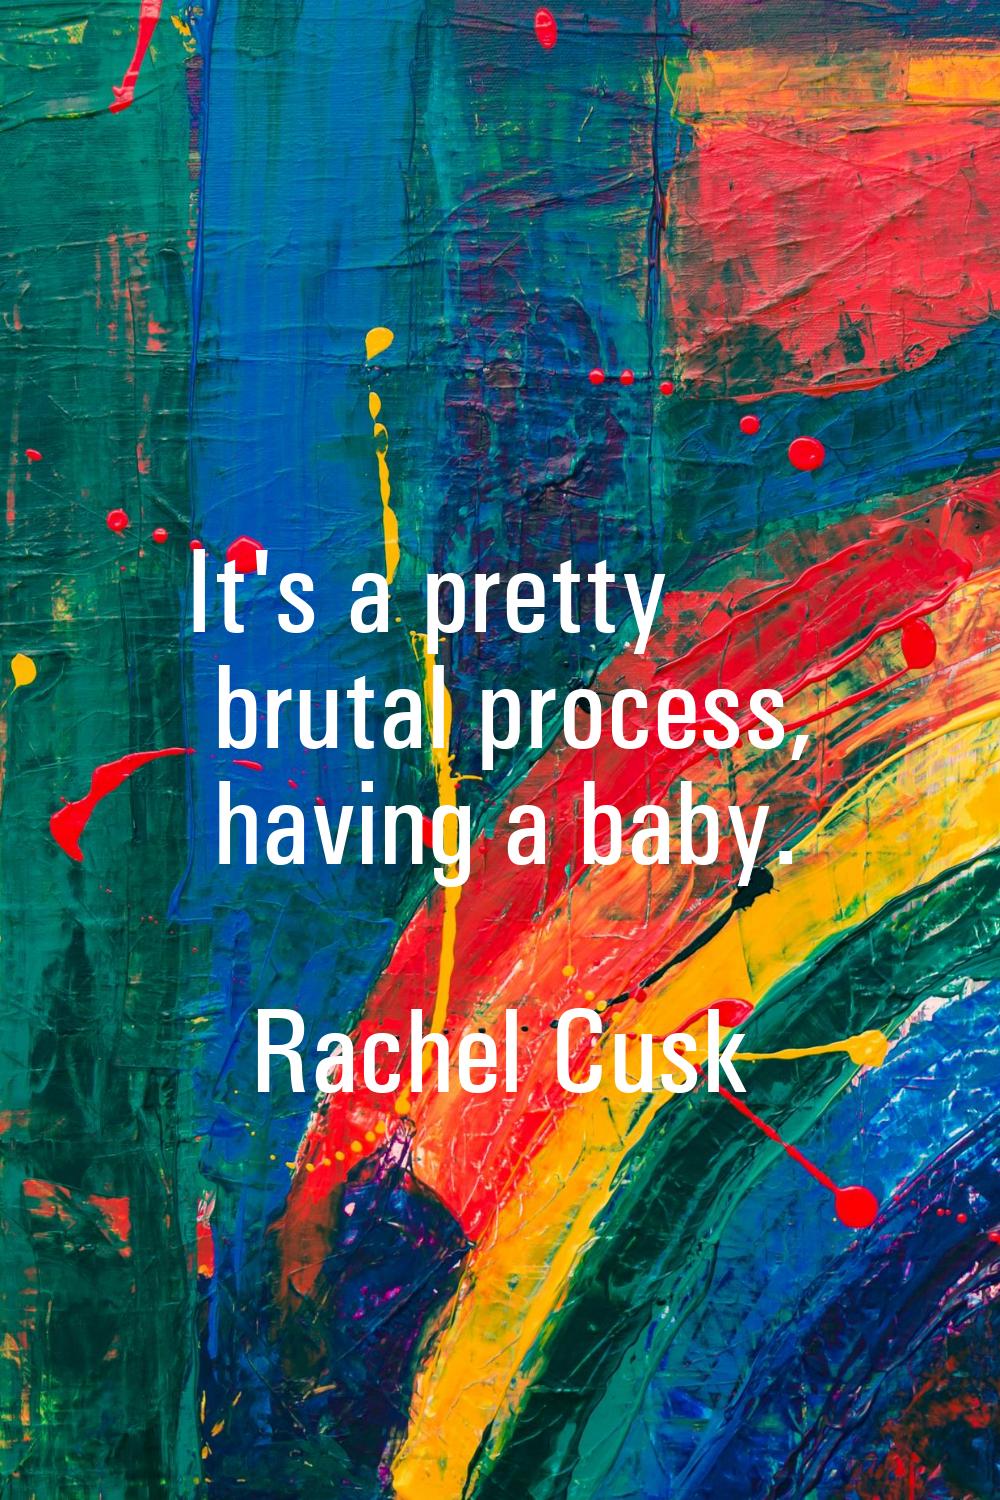 It's a pretty brutal process, having a baby.